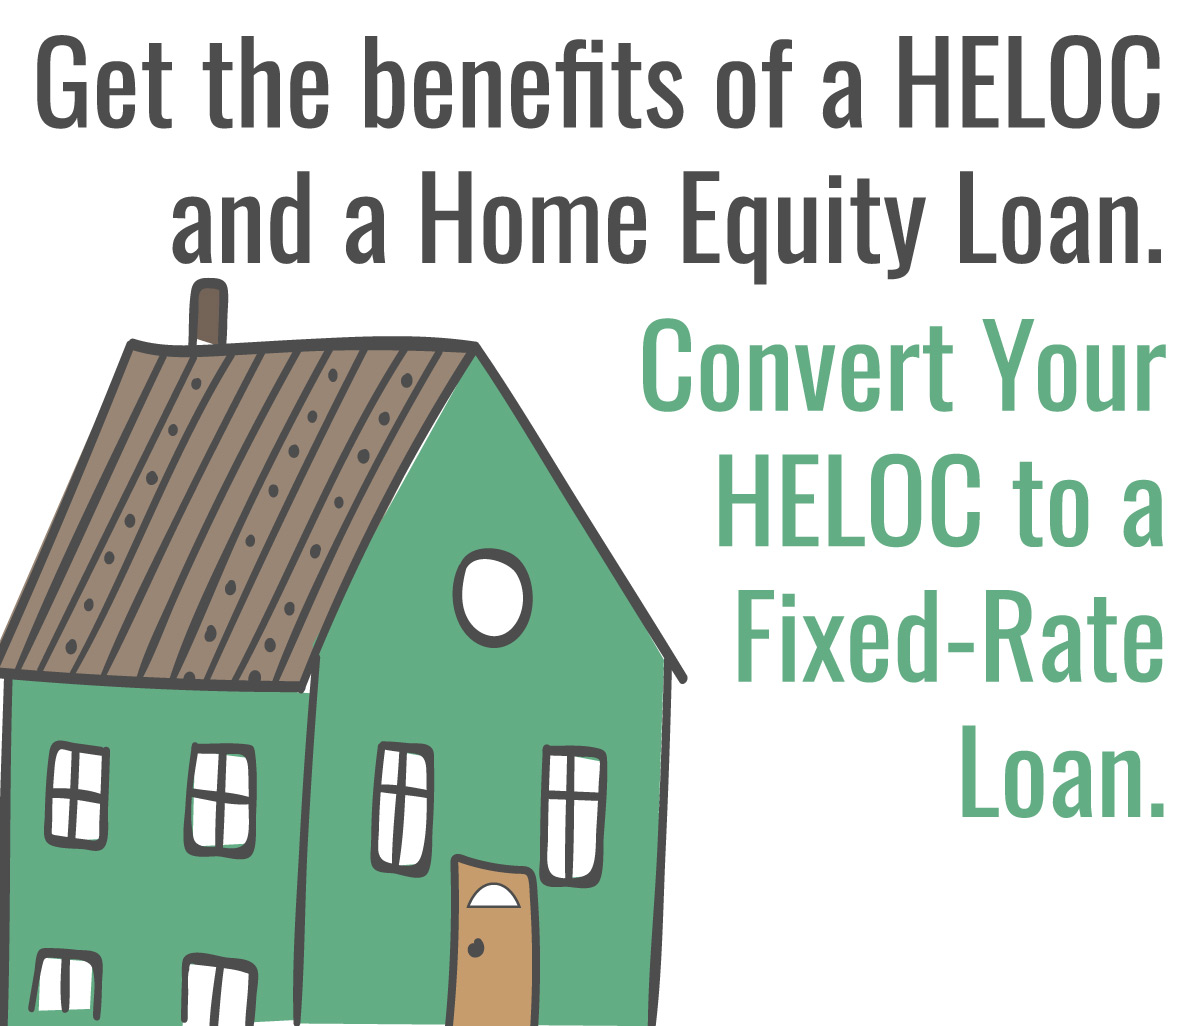 Heloc to fixed-rate